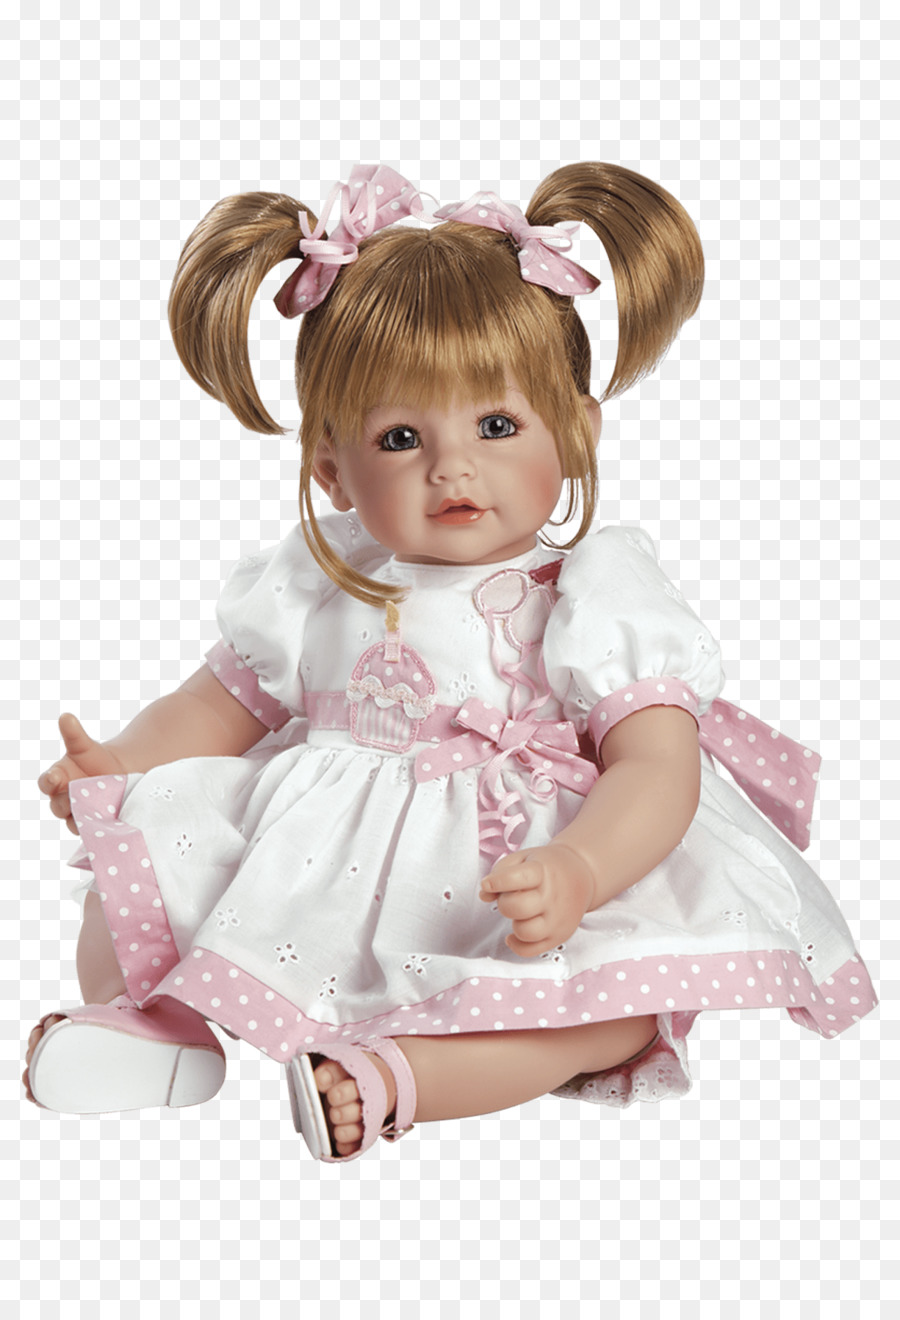 Amazon.com Doll Toy Birthday Gift - doll png download - 1225*1788 - Free Transparent Amazoncom png Download.